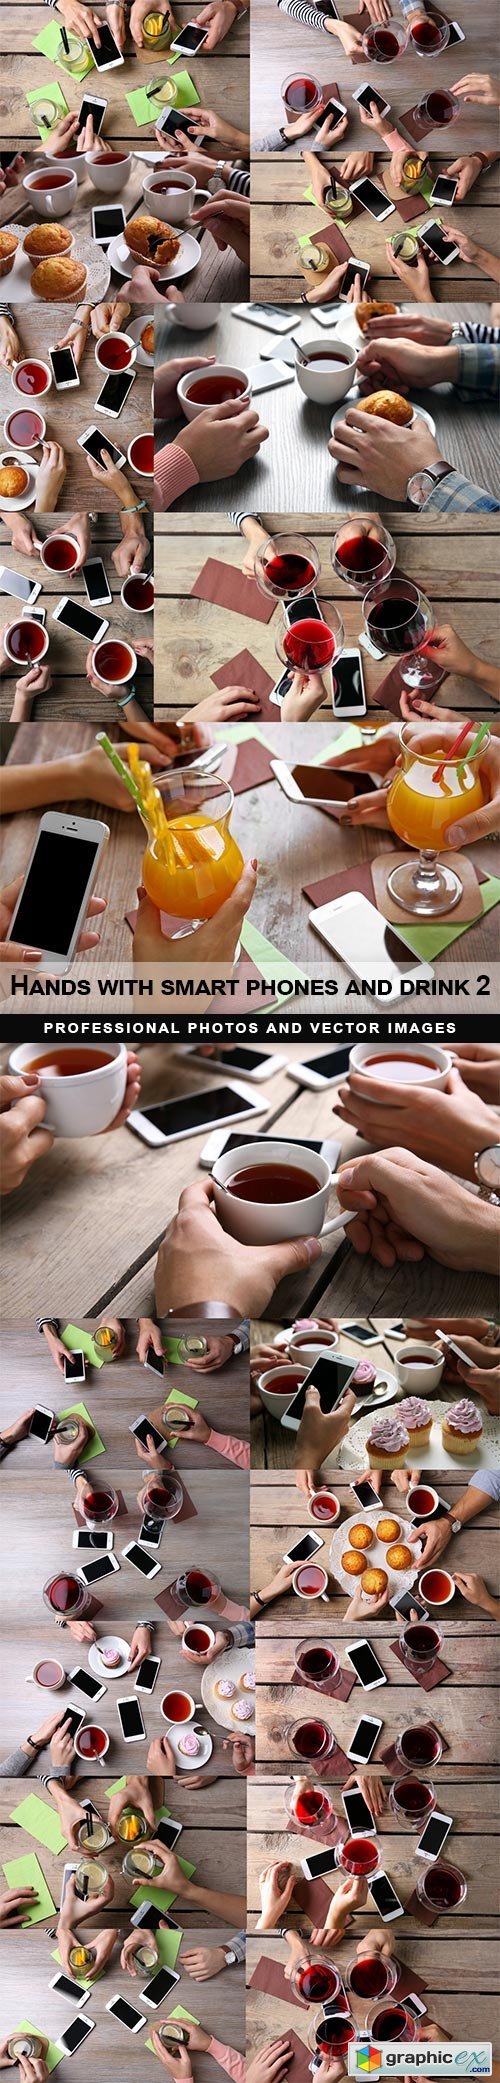 Hands with smart phones and drink 2